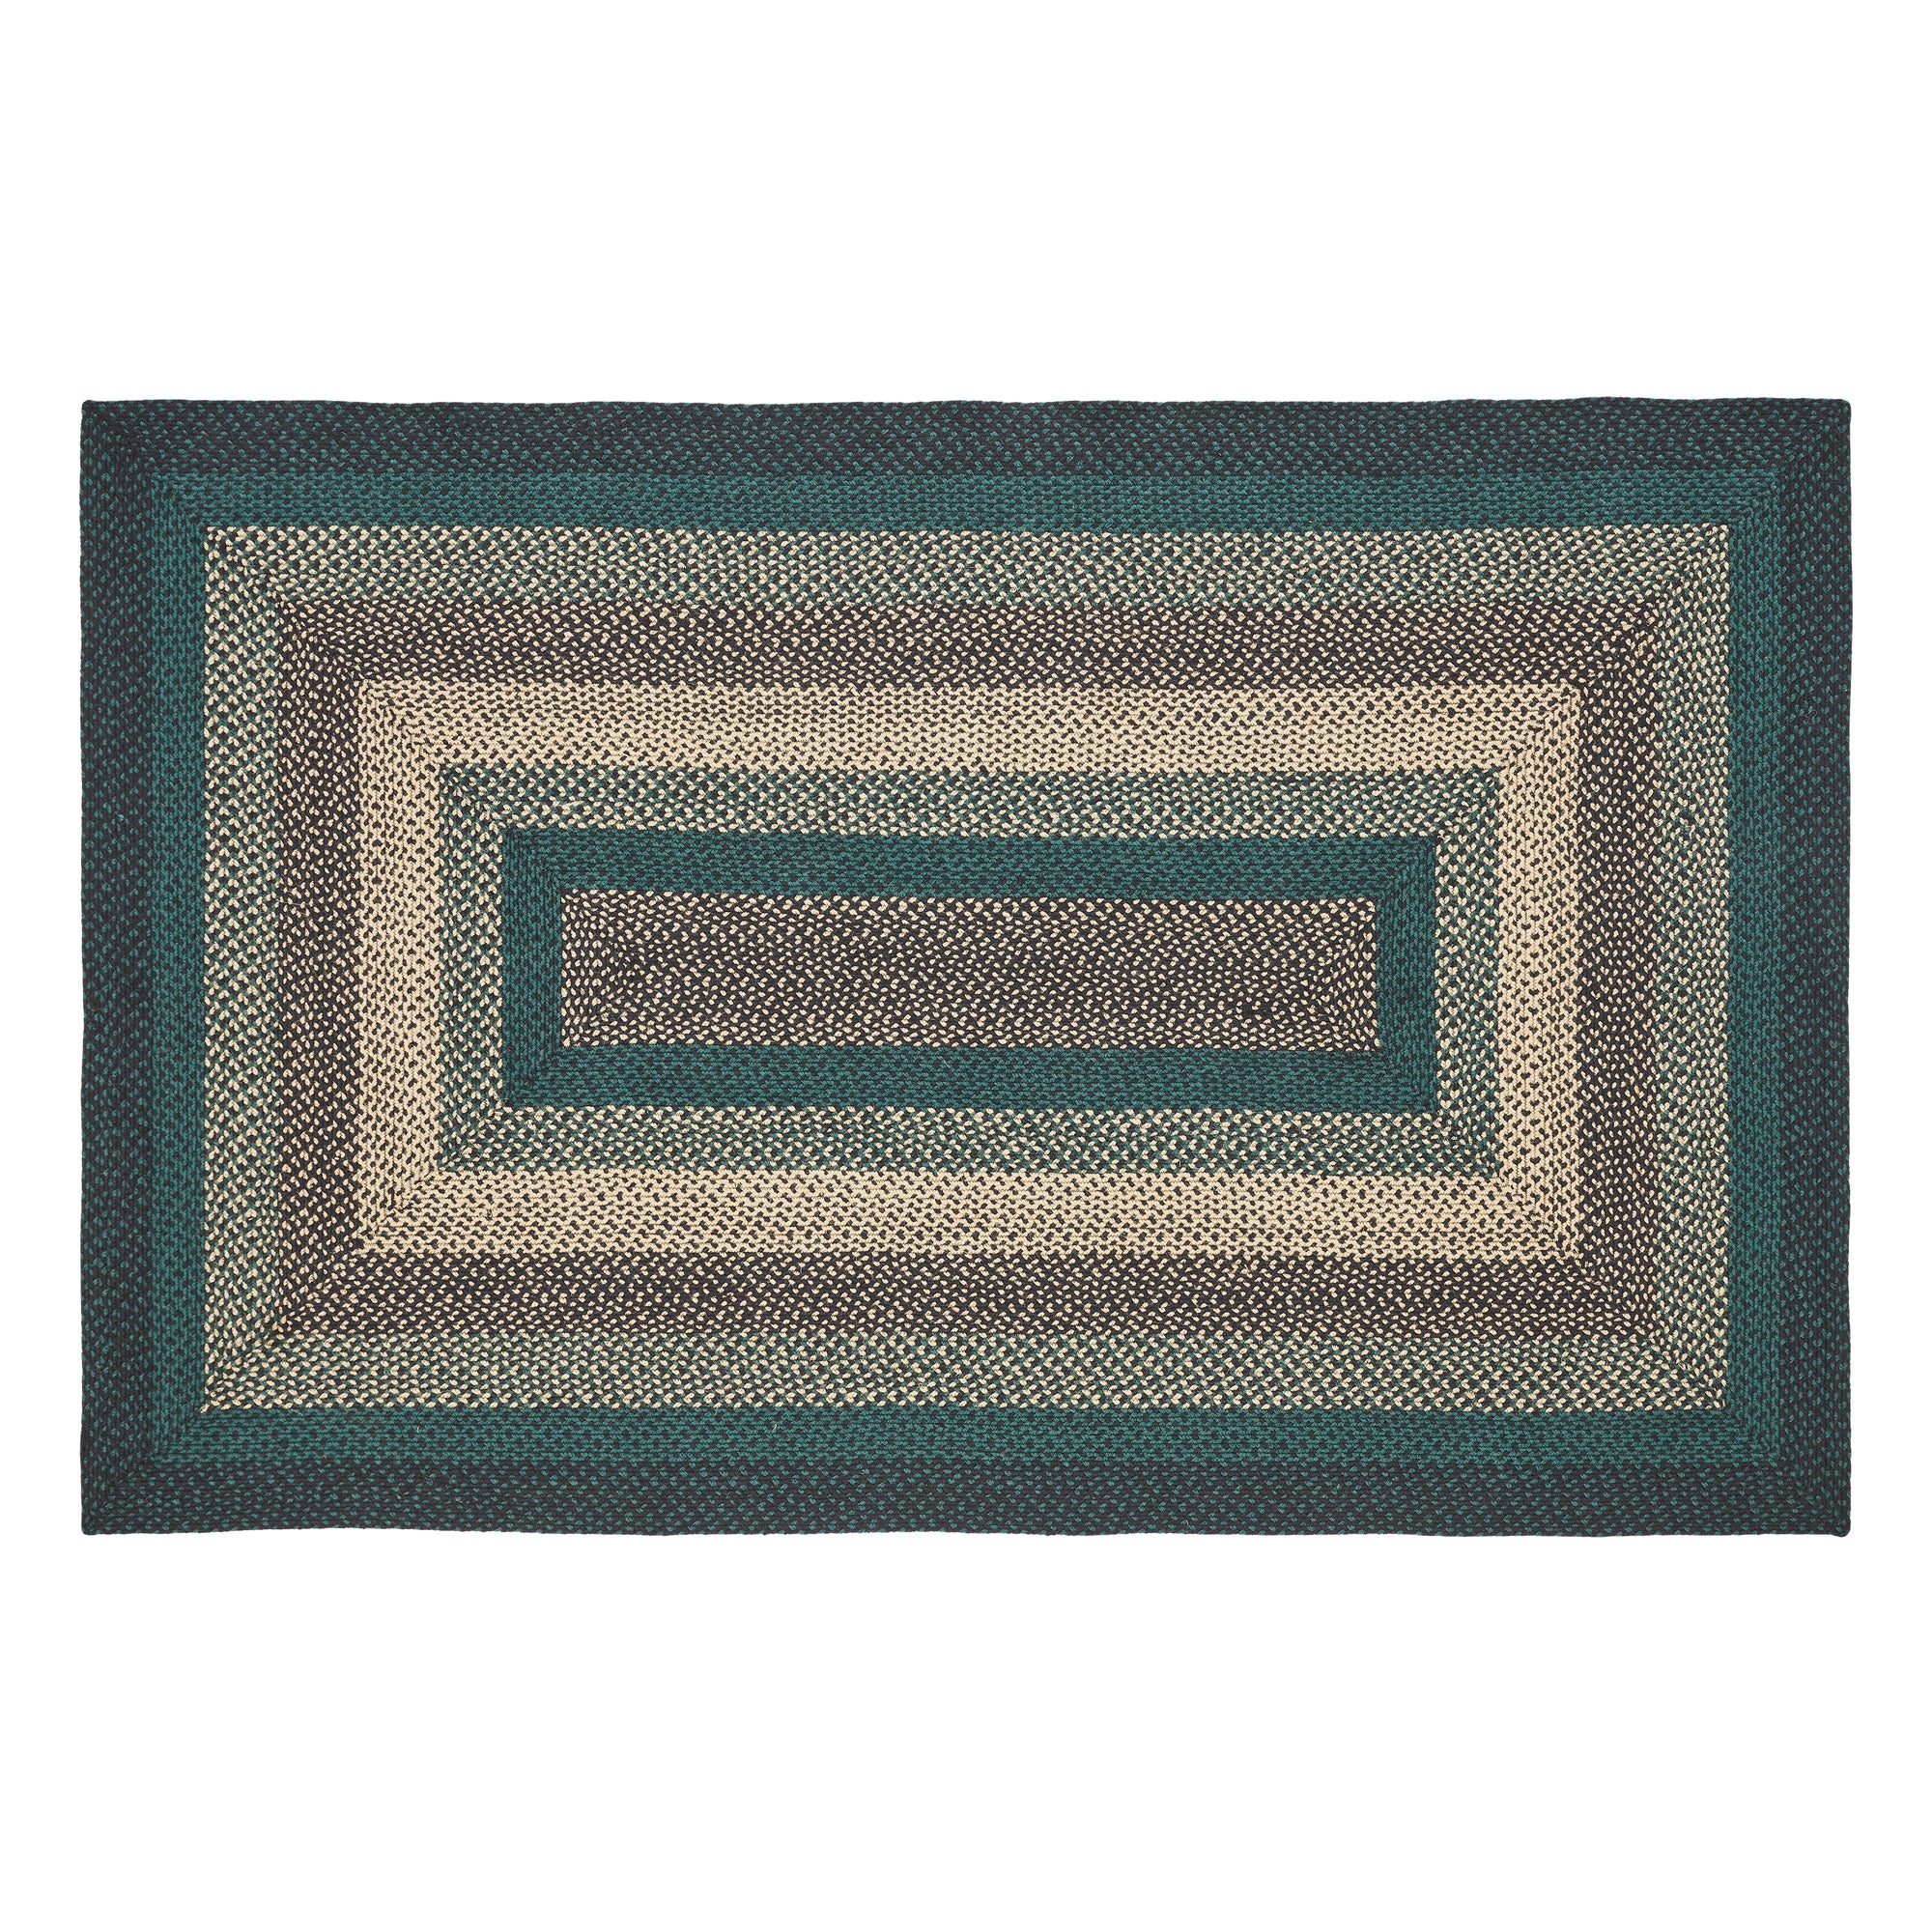 Pine Grove Jute Braided Rug Rect. with Rug Pad 5'x8' VHC Brands